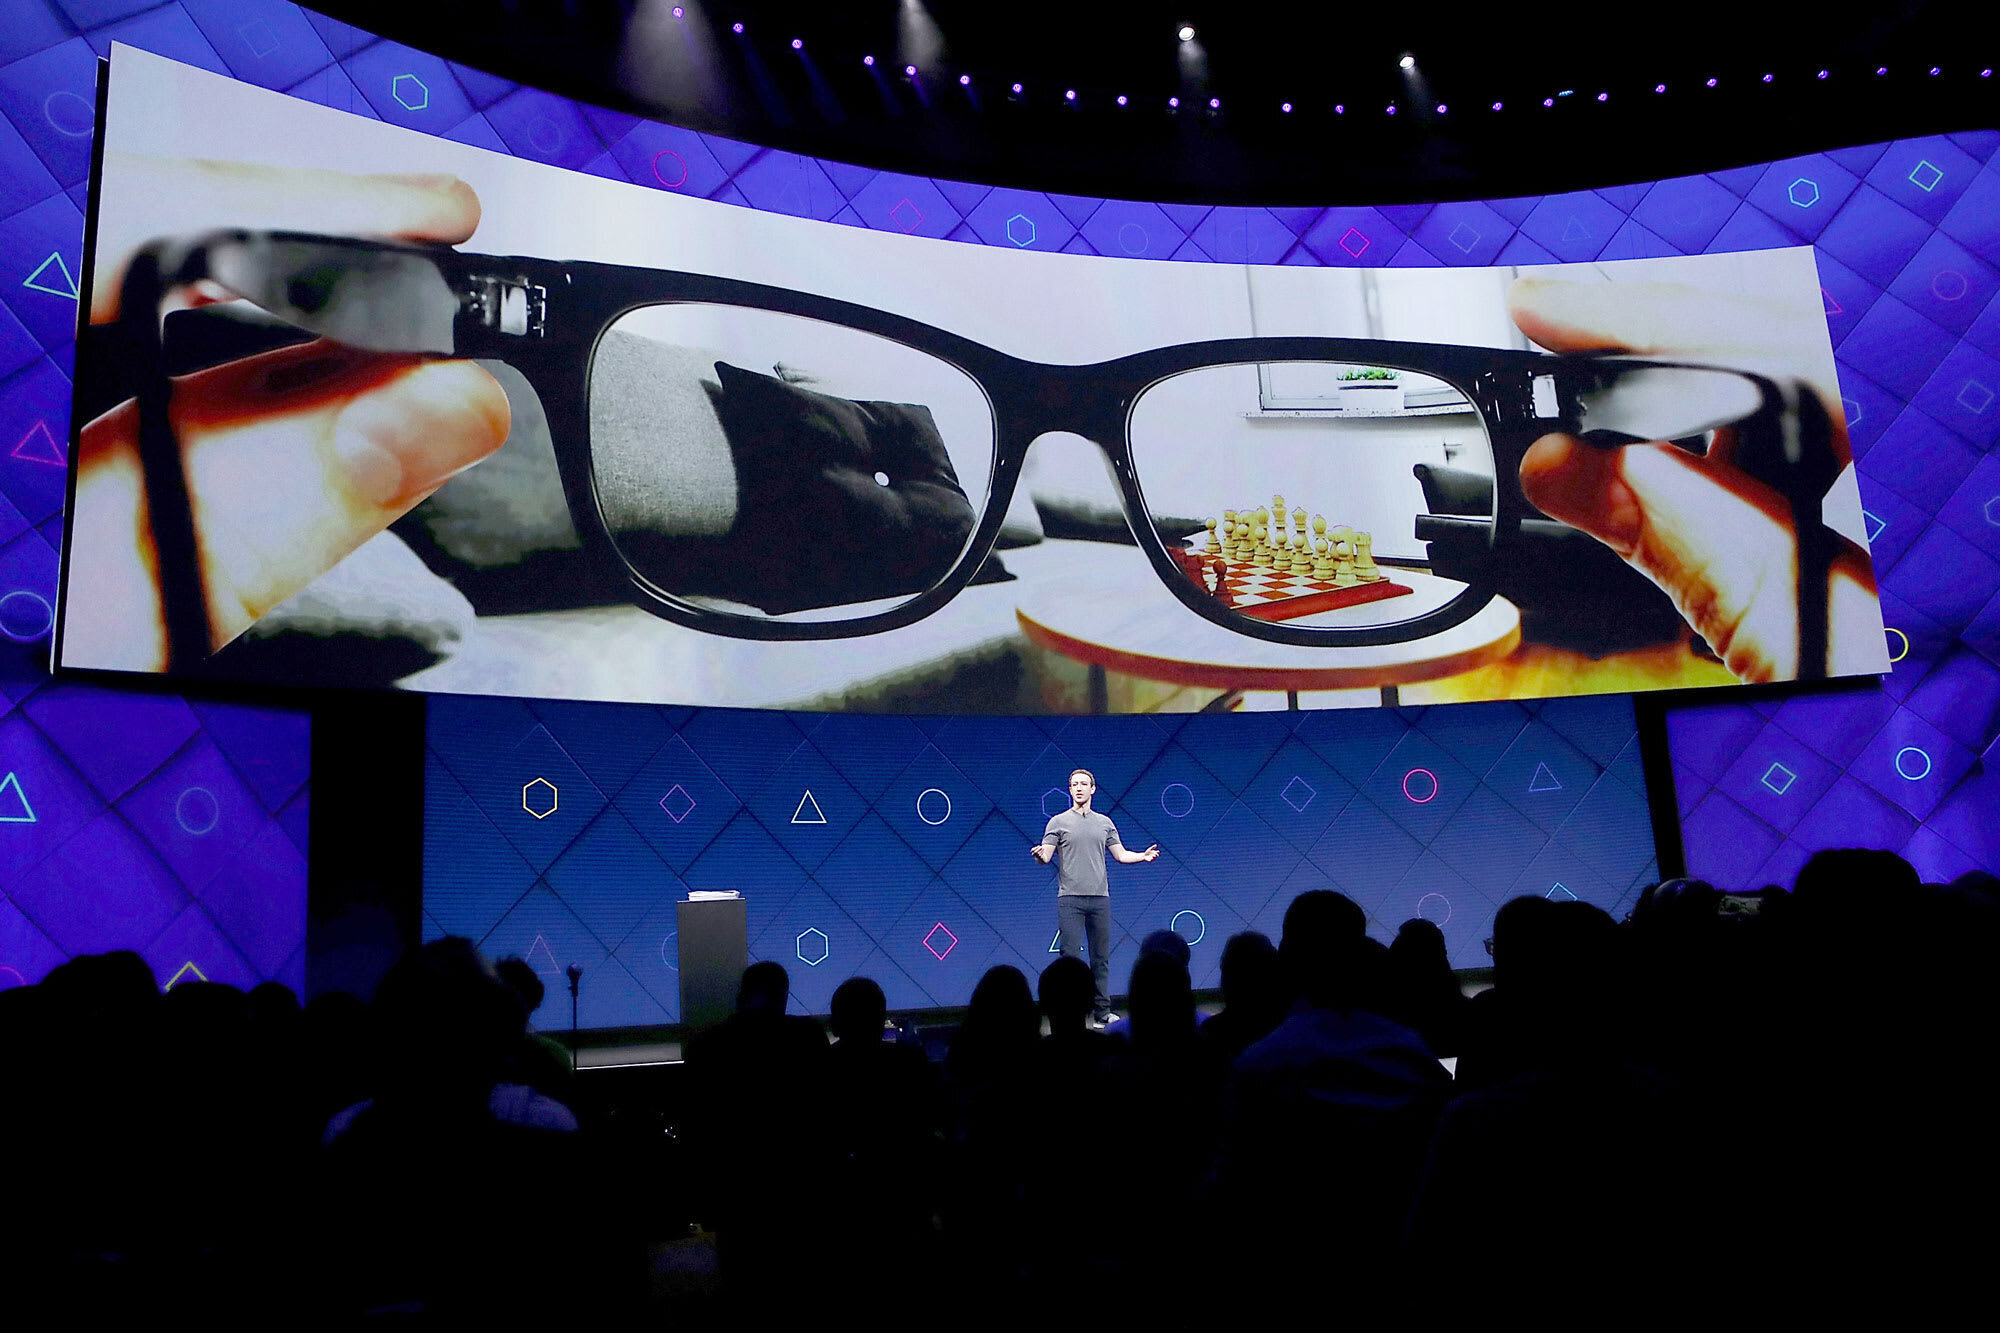 Facebook teams up with Ray Ban for company's first “smart glasses”